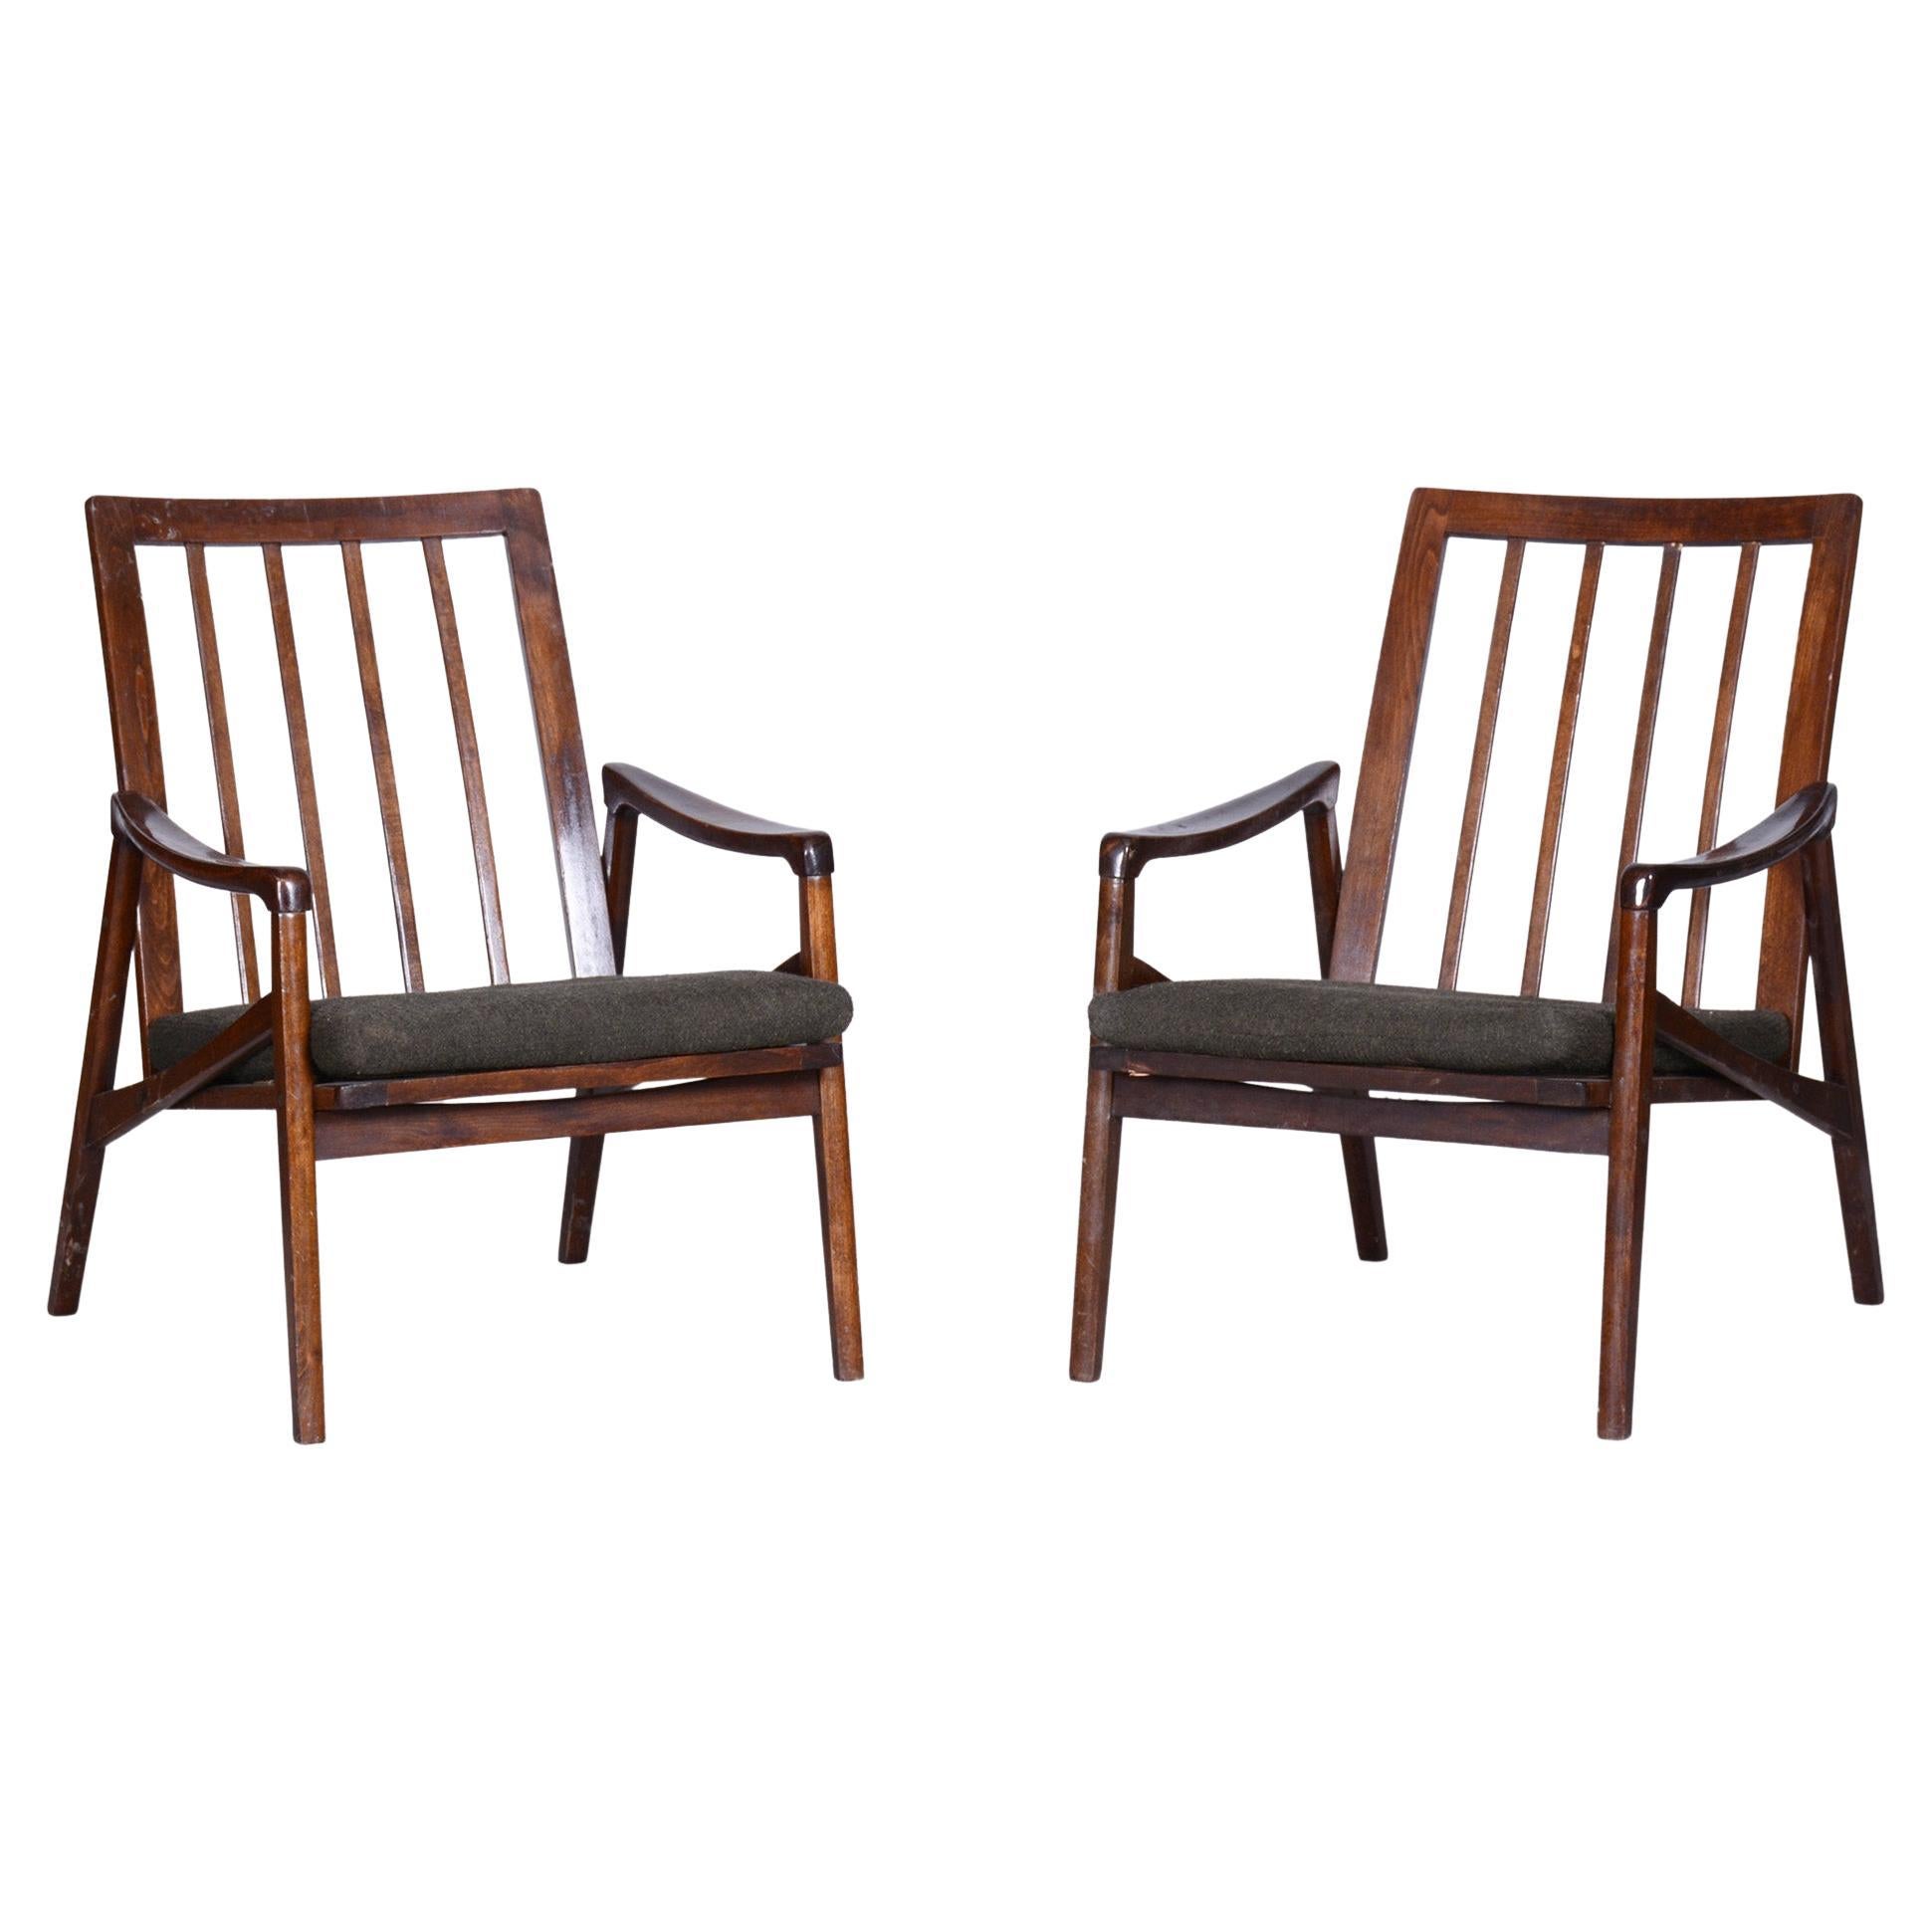 Pair of midcentury armchairs.

Period: 1960-1969
Source: Czechia (Czechoslovakia)
Material: Stained beech, fabric

Revived polish.
Stable construction from solid beech.
Professionally cleaned original upholstery.